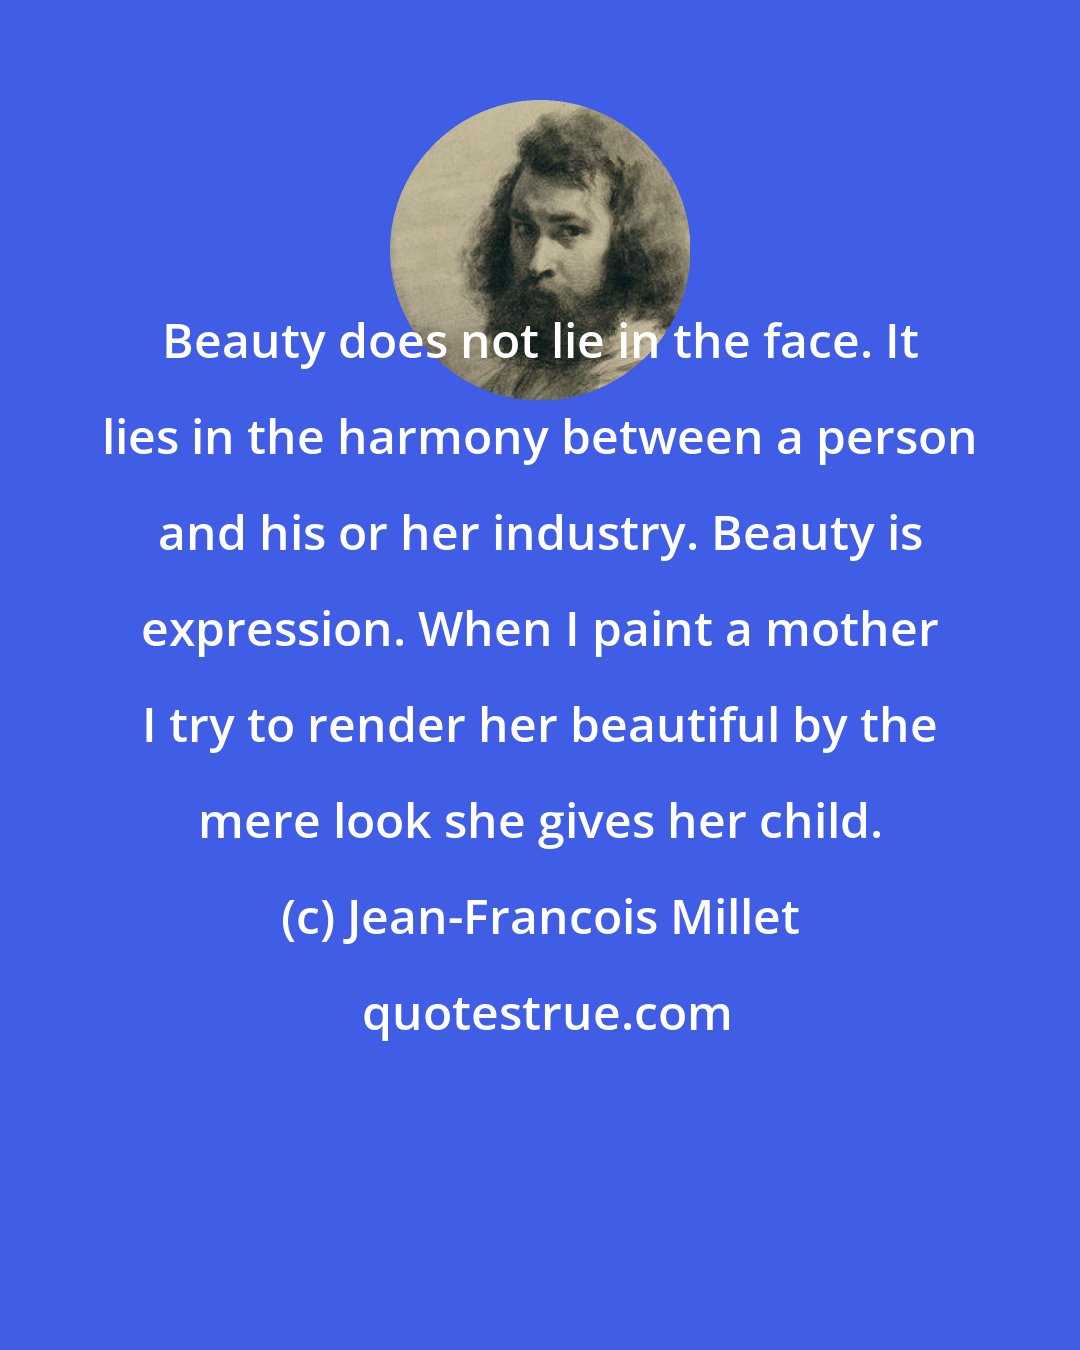 Jean-Francois Millet: Beauty does not lie in the face. It lies in the harmony between a person and his or her industry. Beauty is expression. When I paint a mother I try to render her beautiful by the mere look she gives her child.